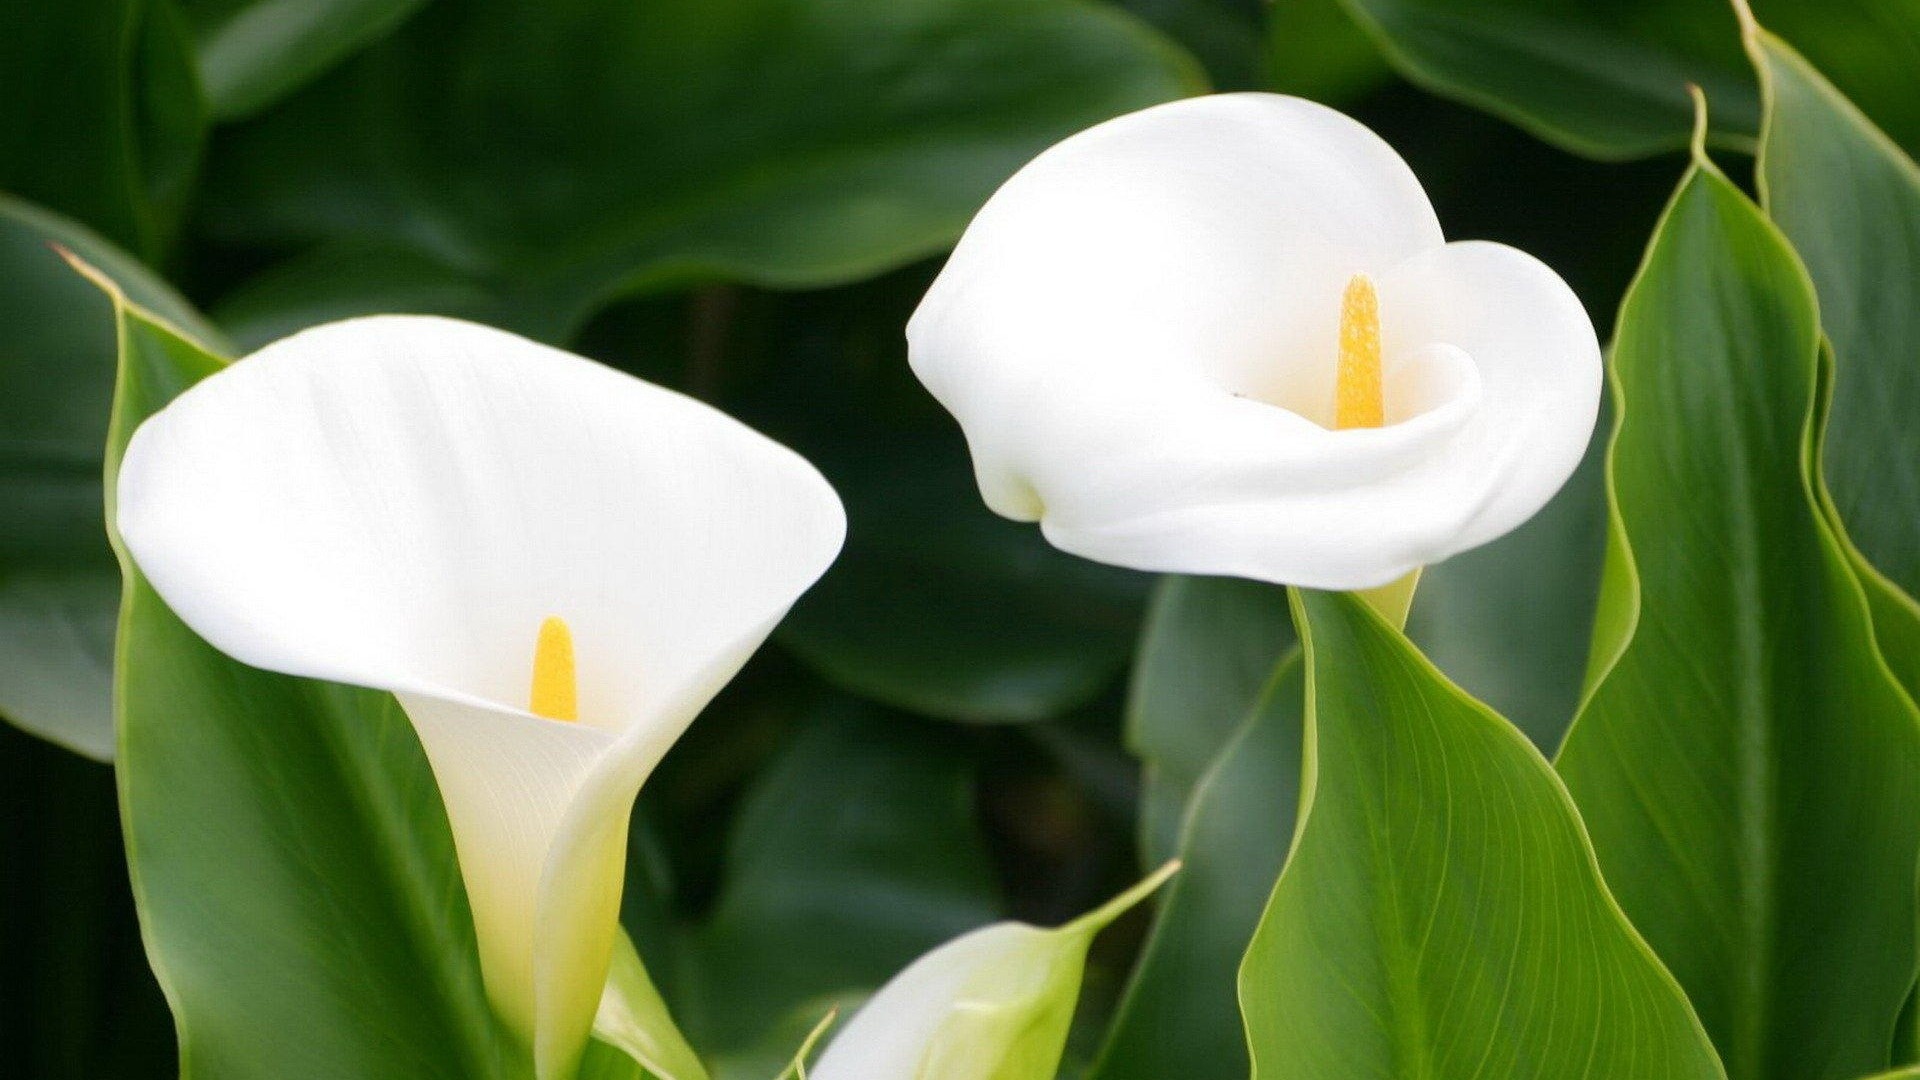 Calla Lily: The spathe surrounds a yellow spadix, Terrestrial plant. 1920x1080 Full HD Background.